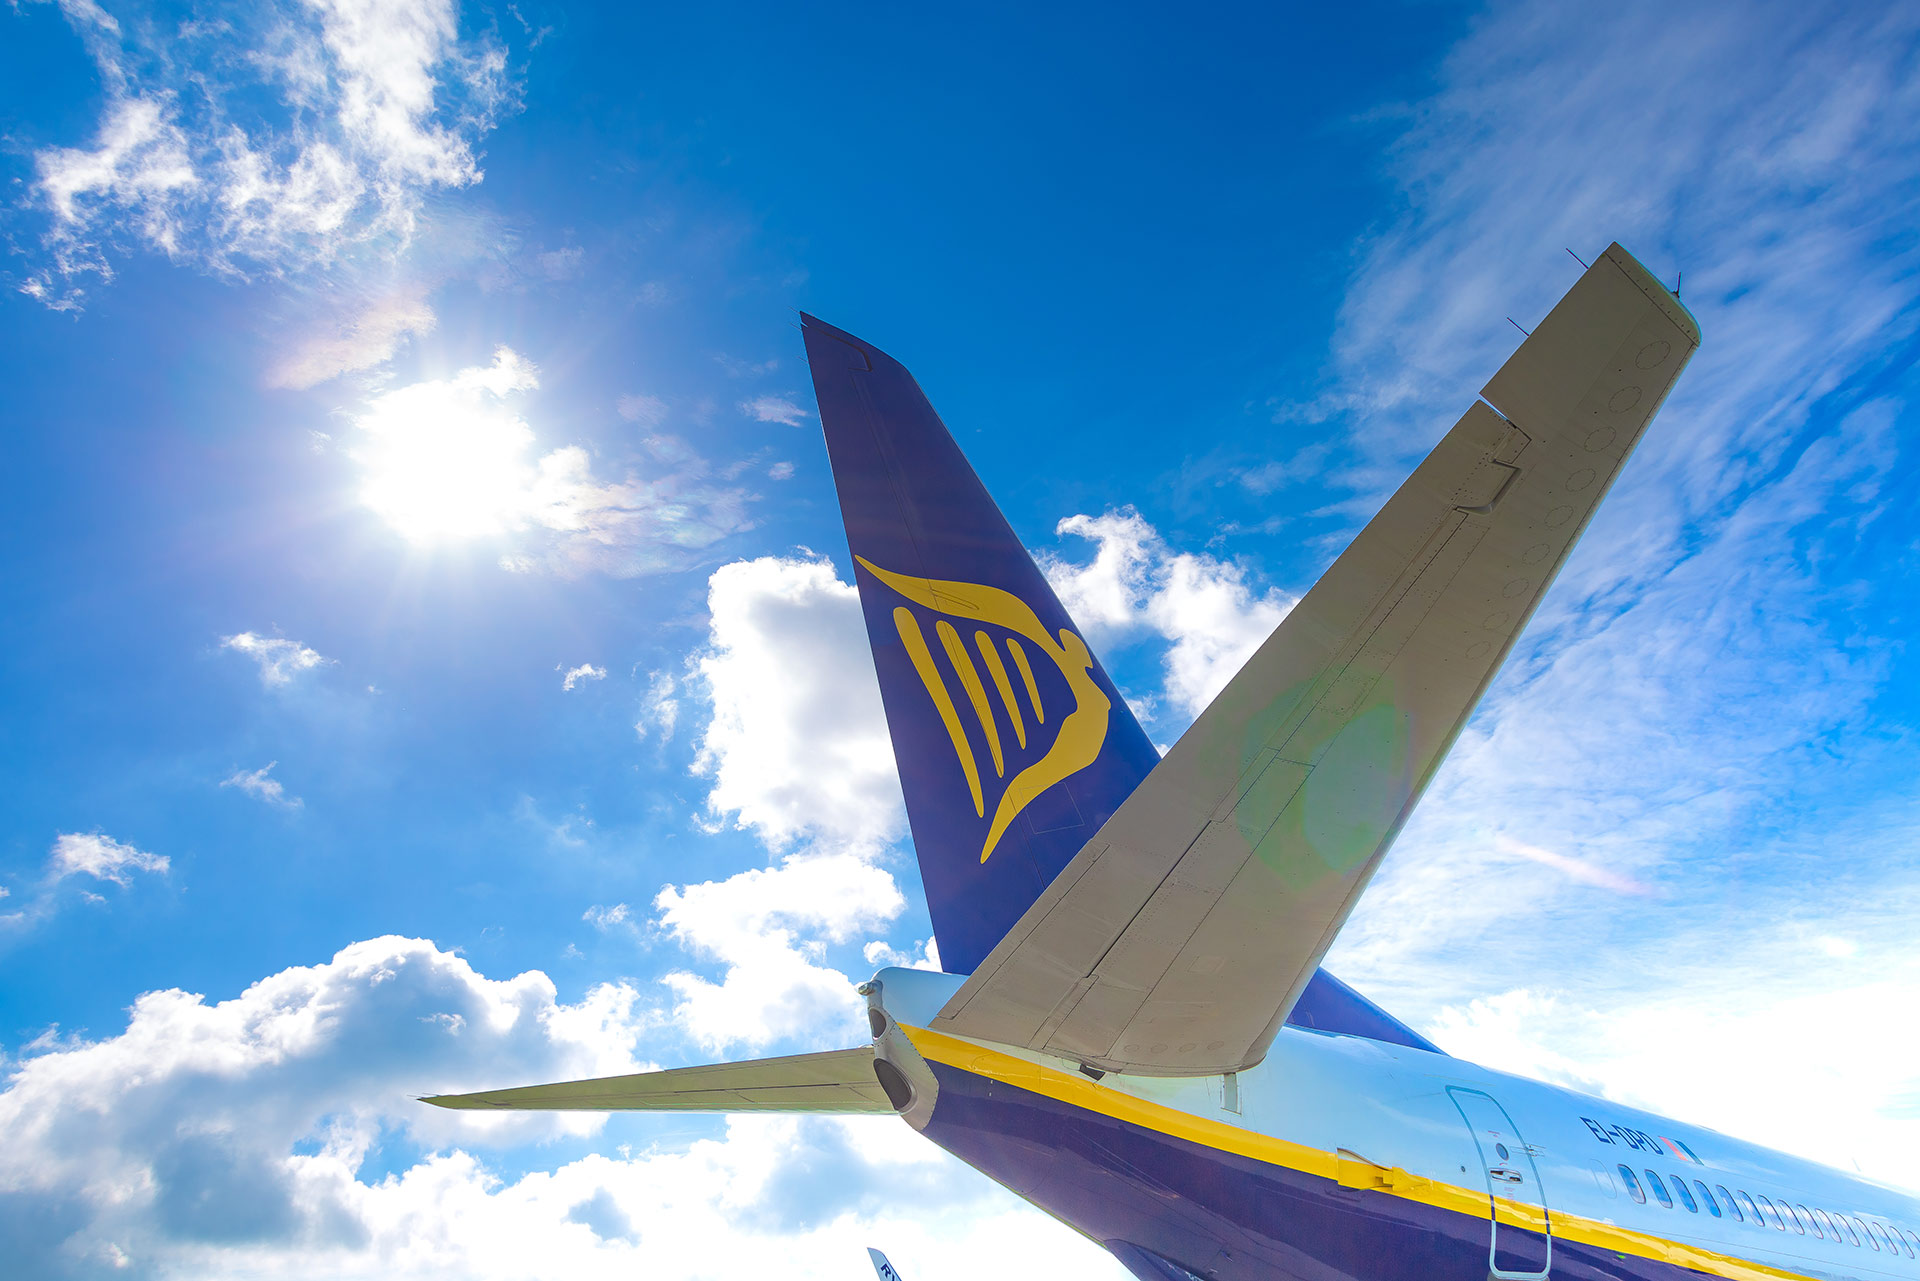 93% Of Ryanair Flights Arrived On Time In October (Excl ATC)